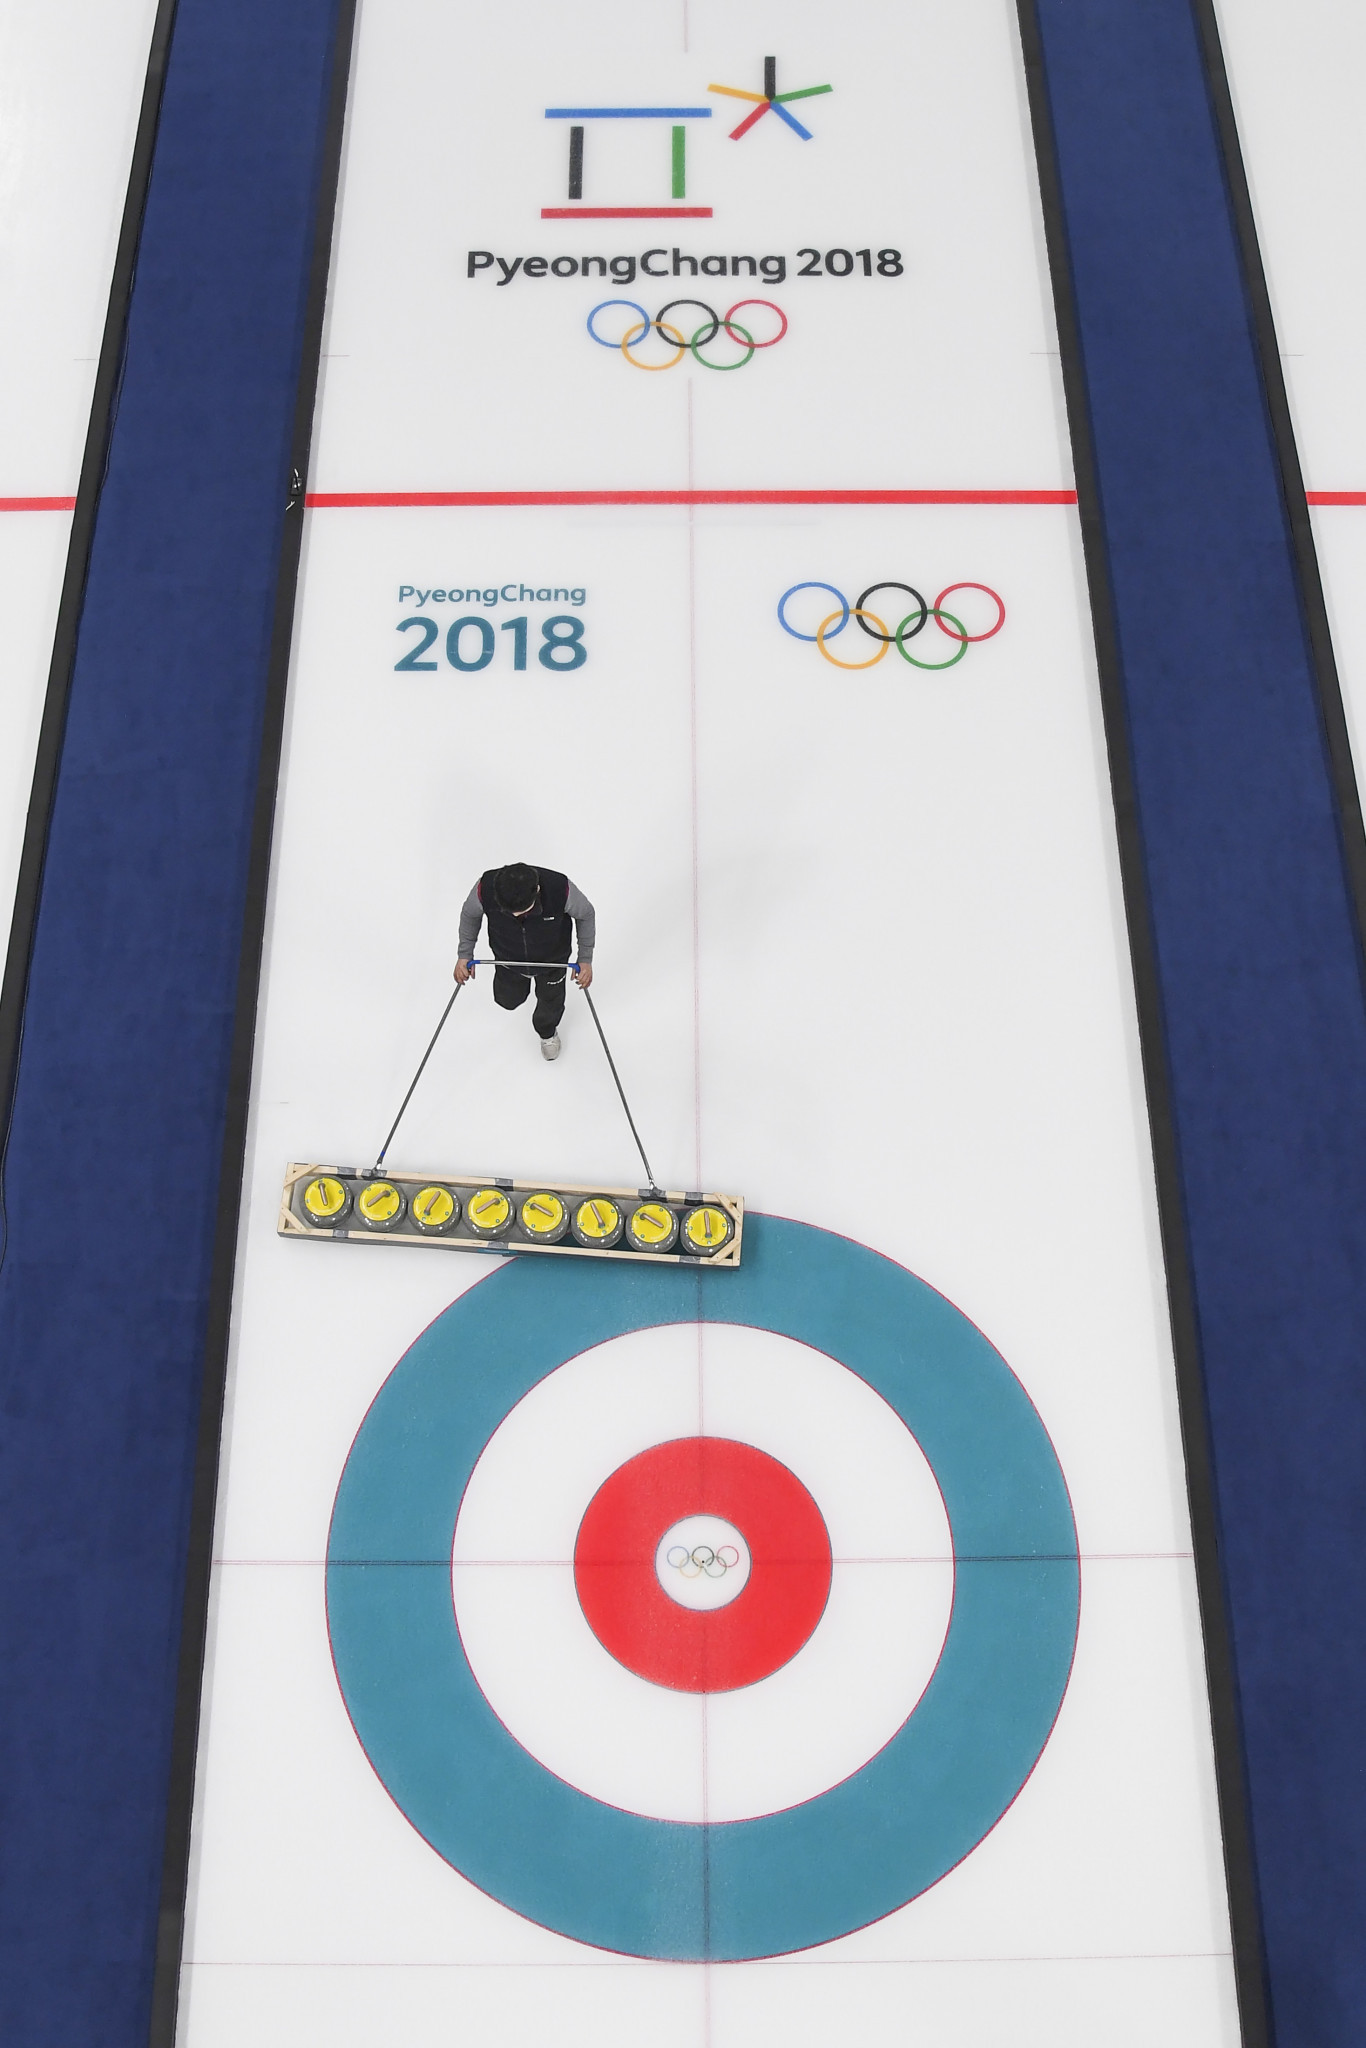 The new curling world ranking changes were approved in 2016, but they only now take effect following the 2018 Winter Olympic and Paralympic Games in Pyeongchang ©Getty Images